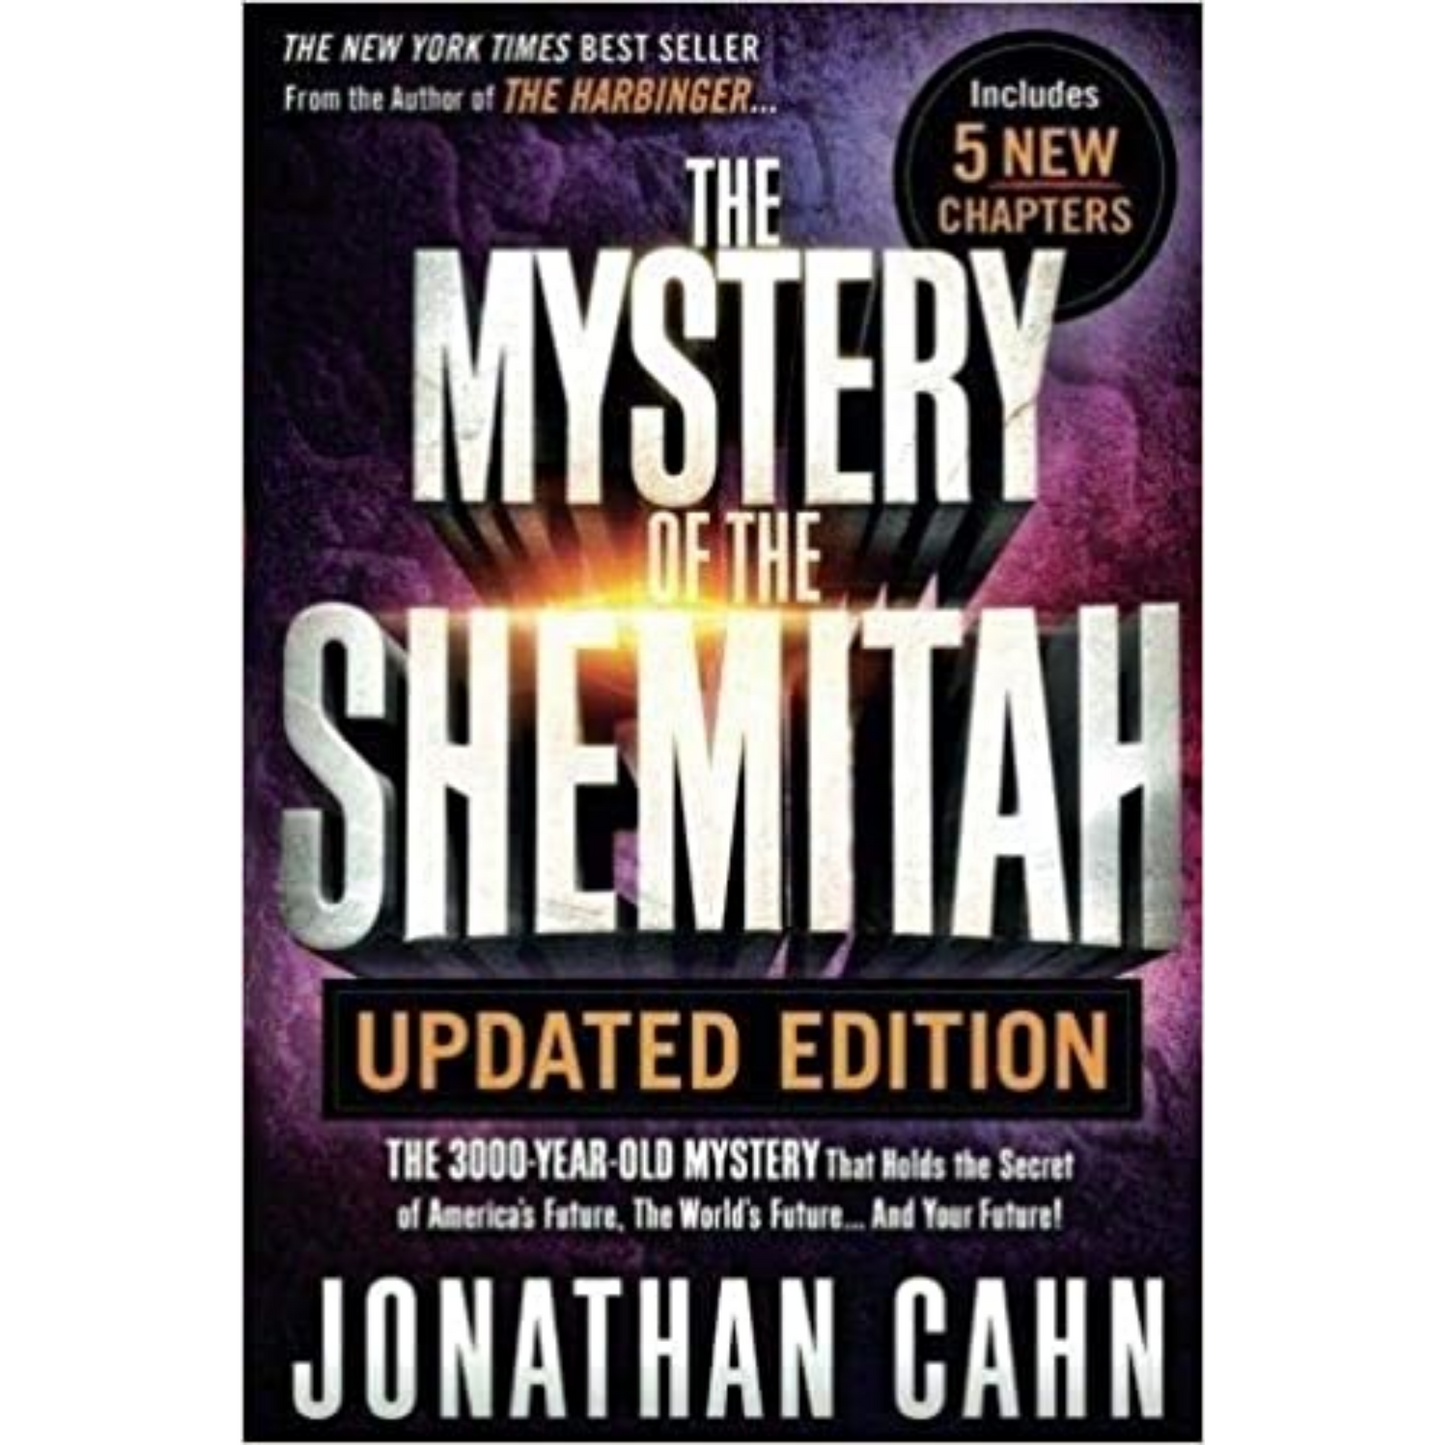 The Mystery Of The Shemitah (Updated Edition)